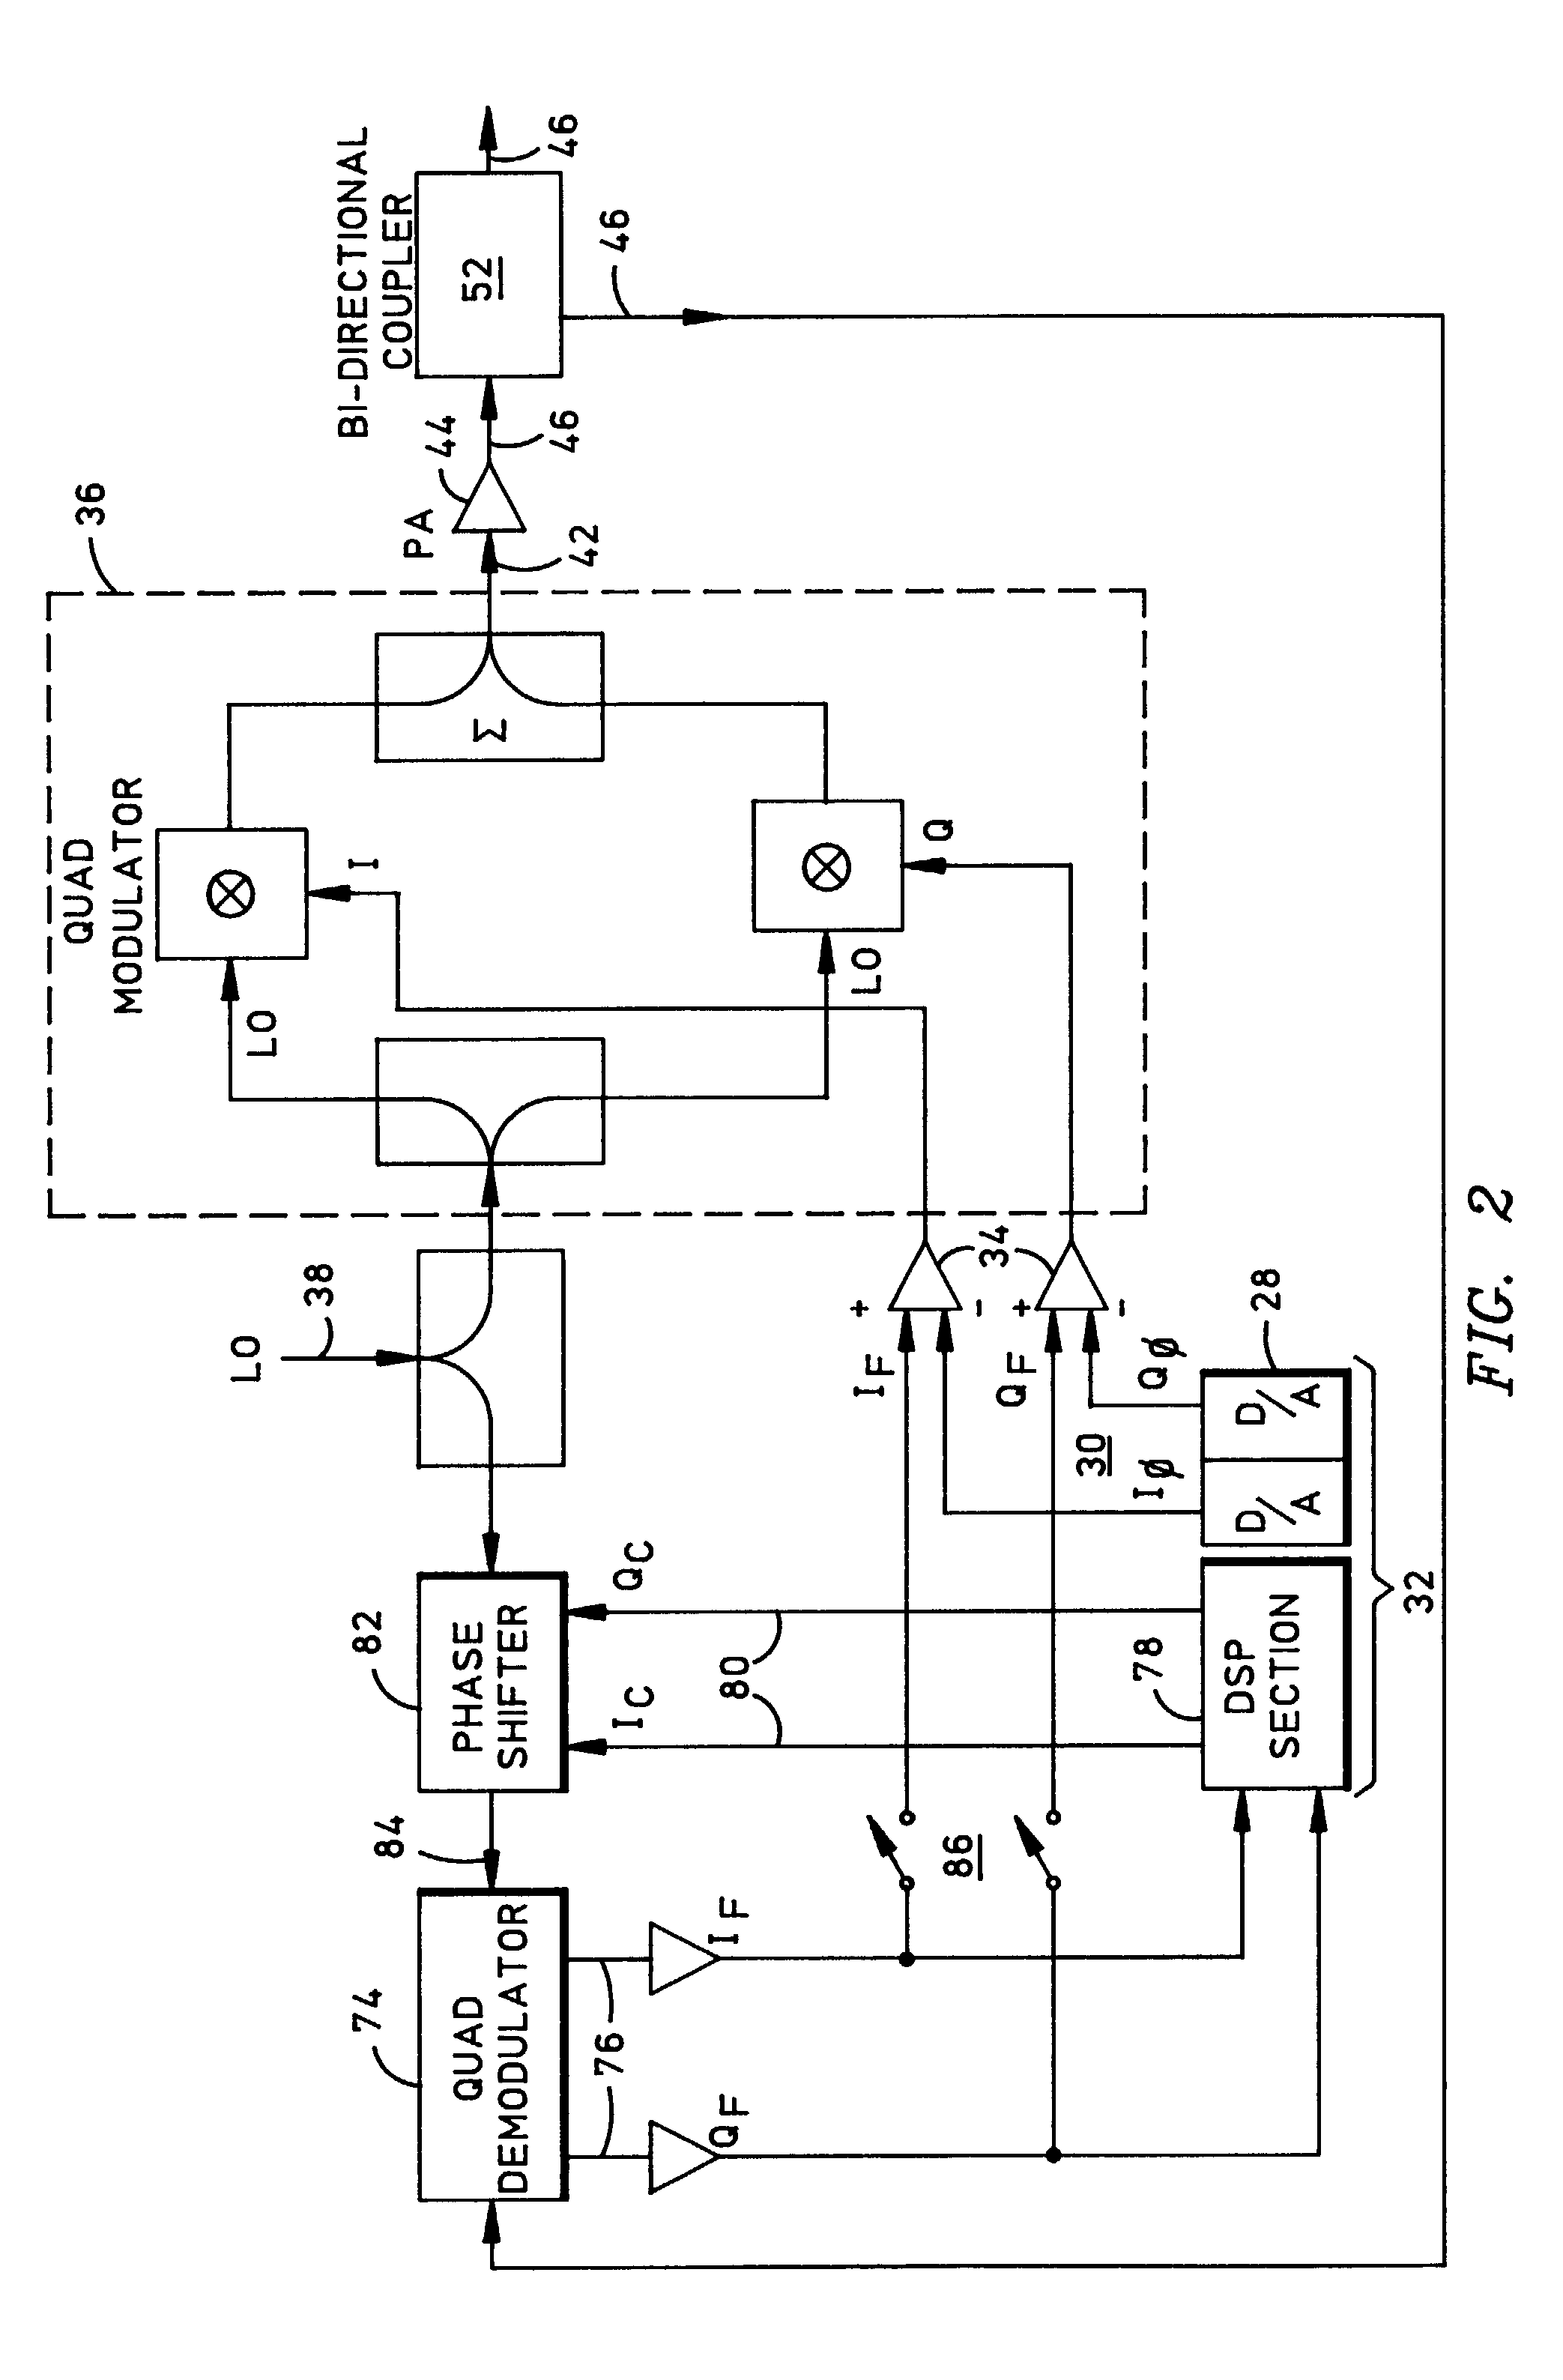 Method and apparatus for transferring multiple symbol streams at low bit-error rates in a narrowband channel